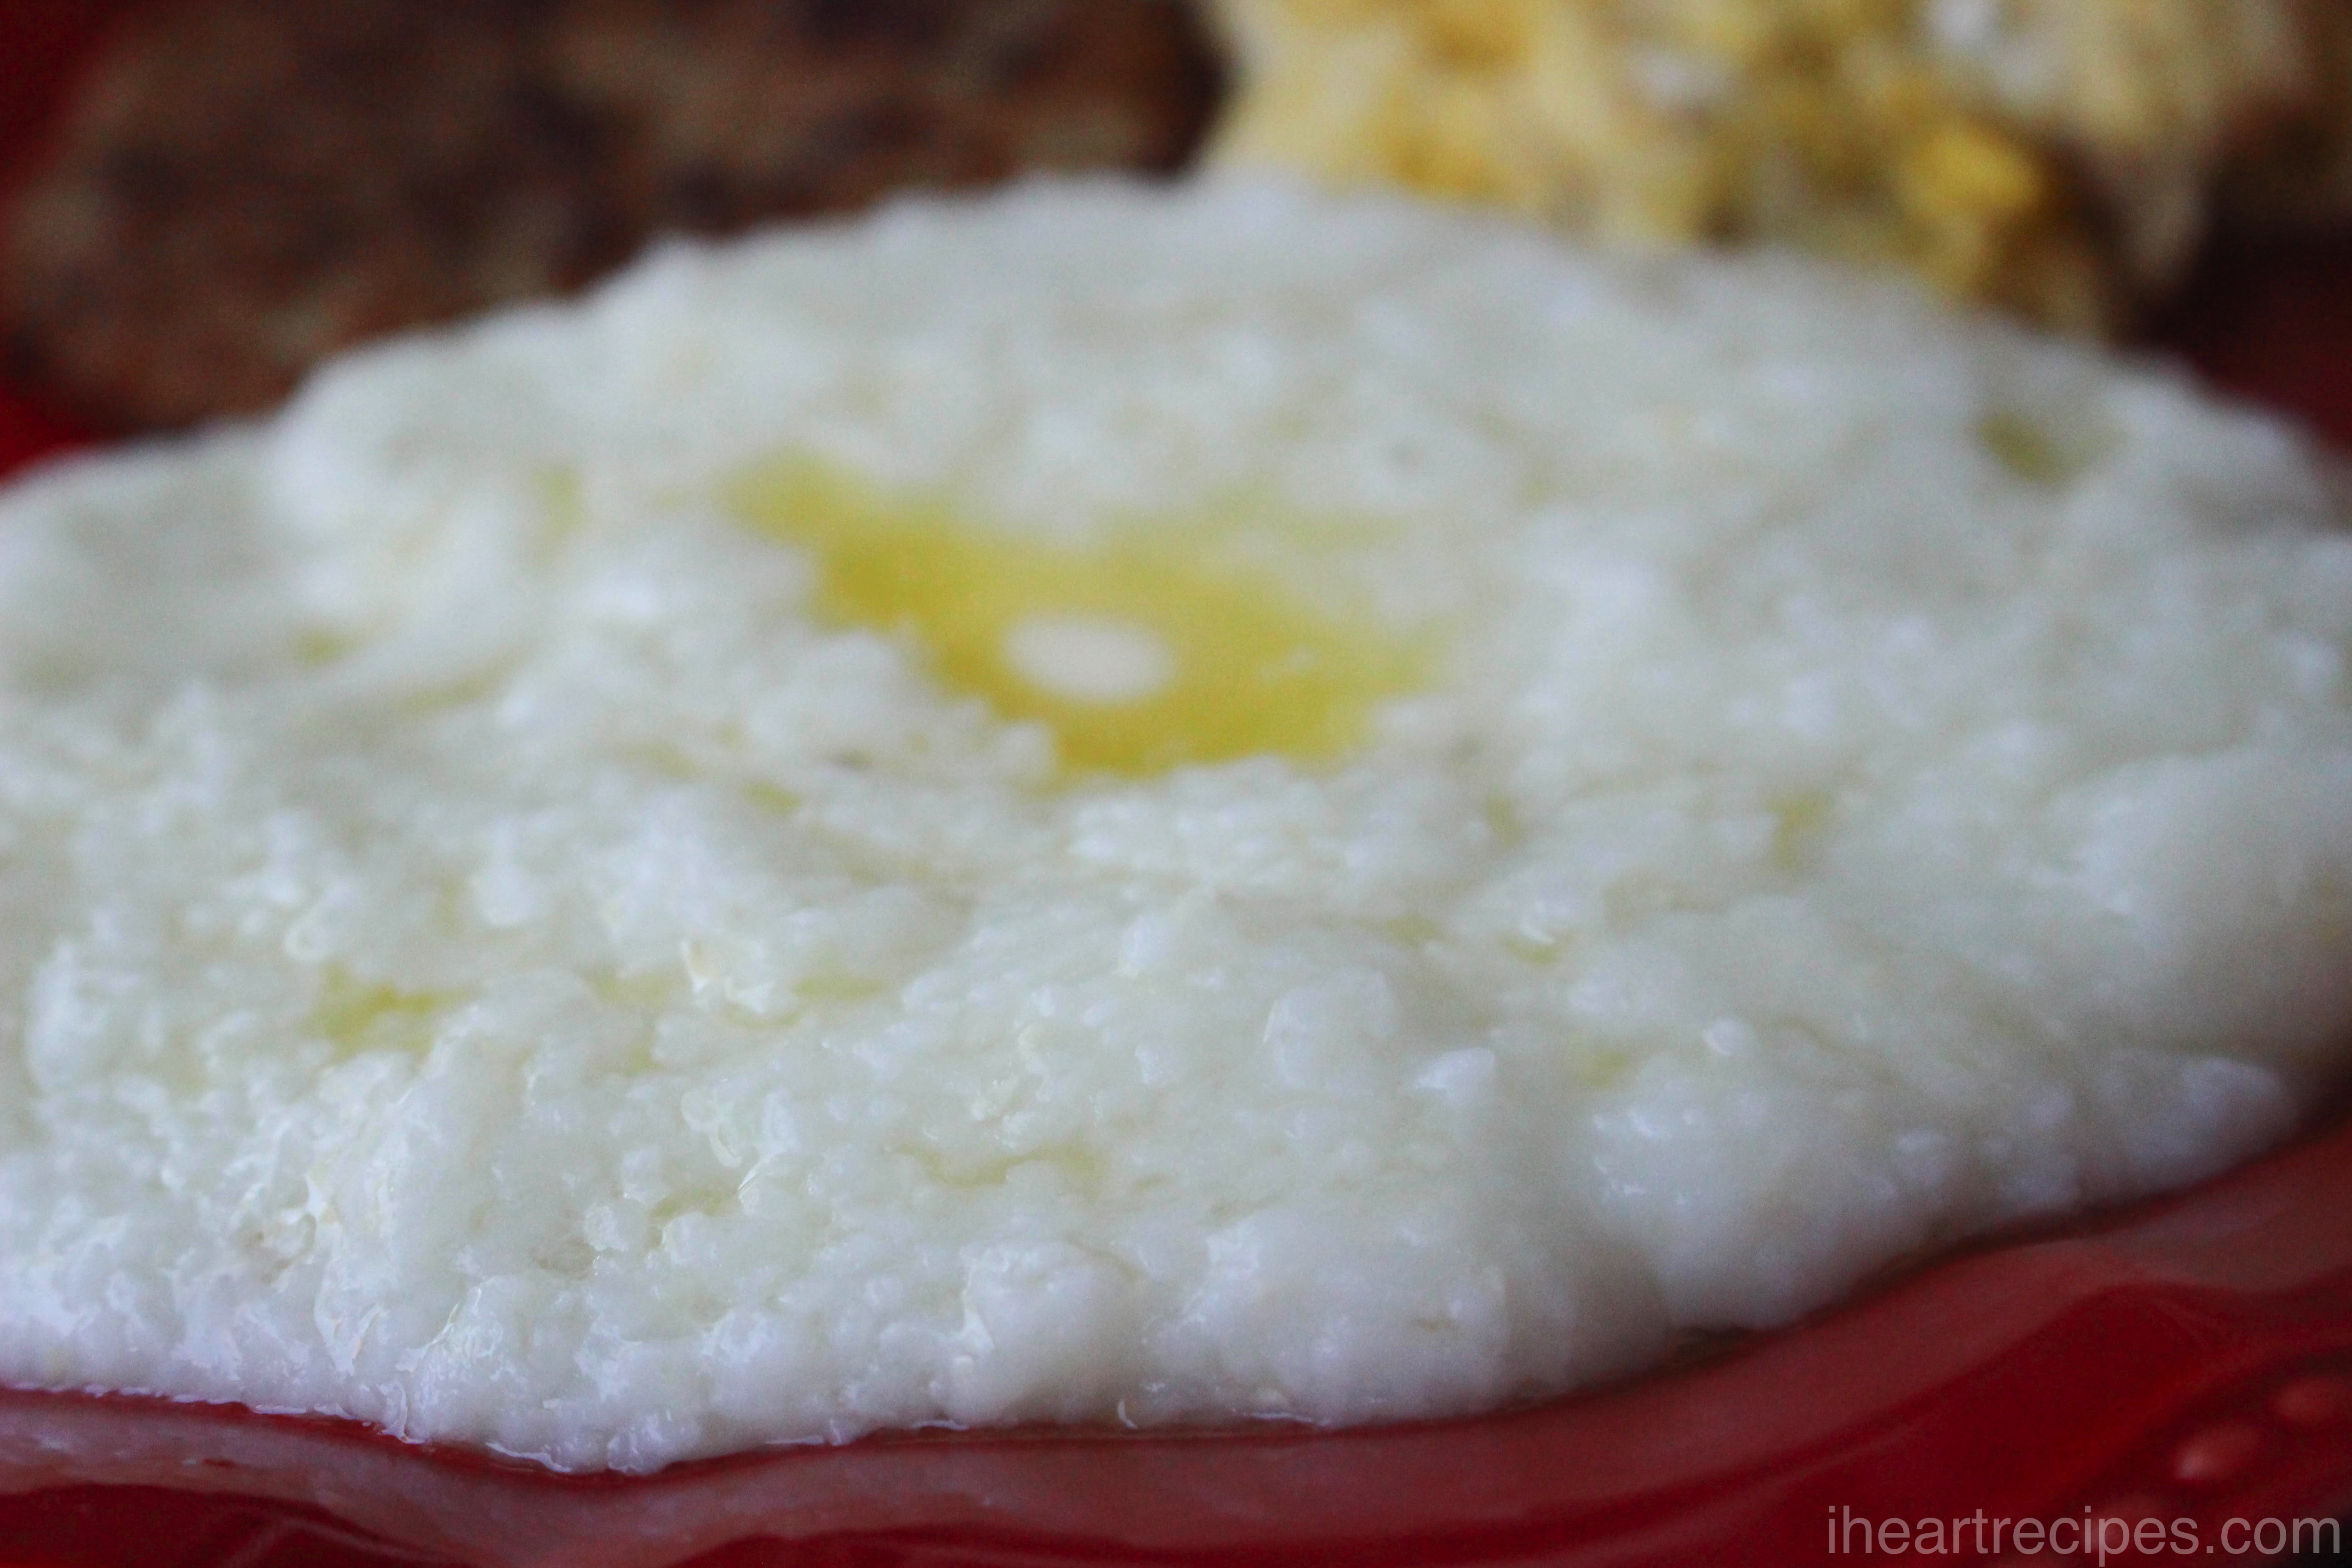 Light and creamy grits served on a scalloped red plate. Enjoy these grits your way! Sweet or salty?